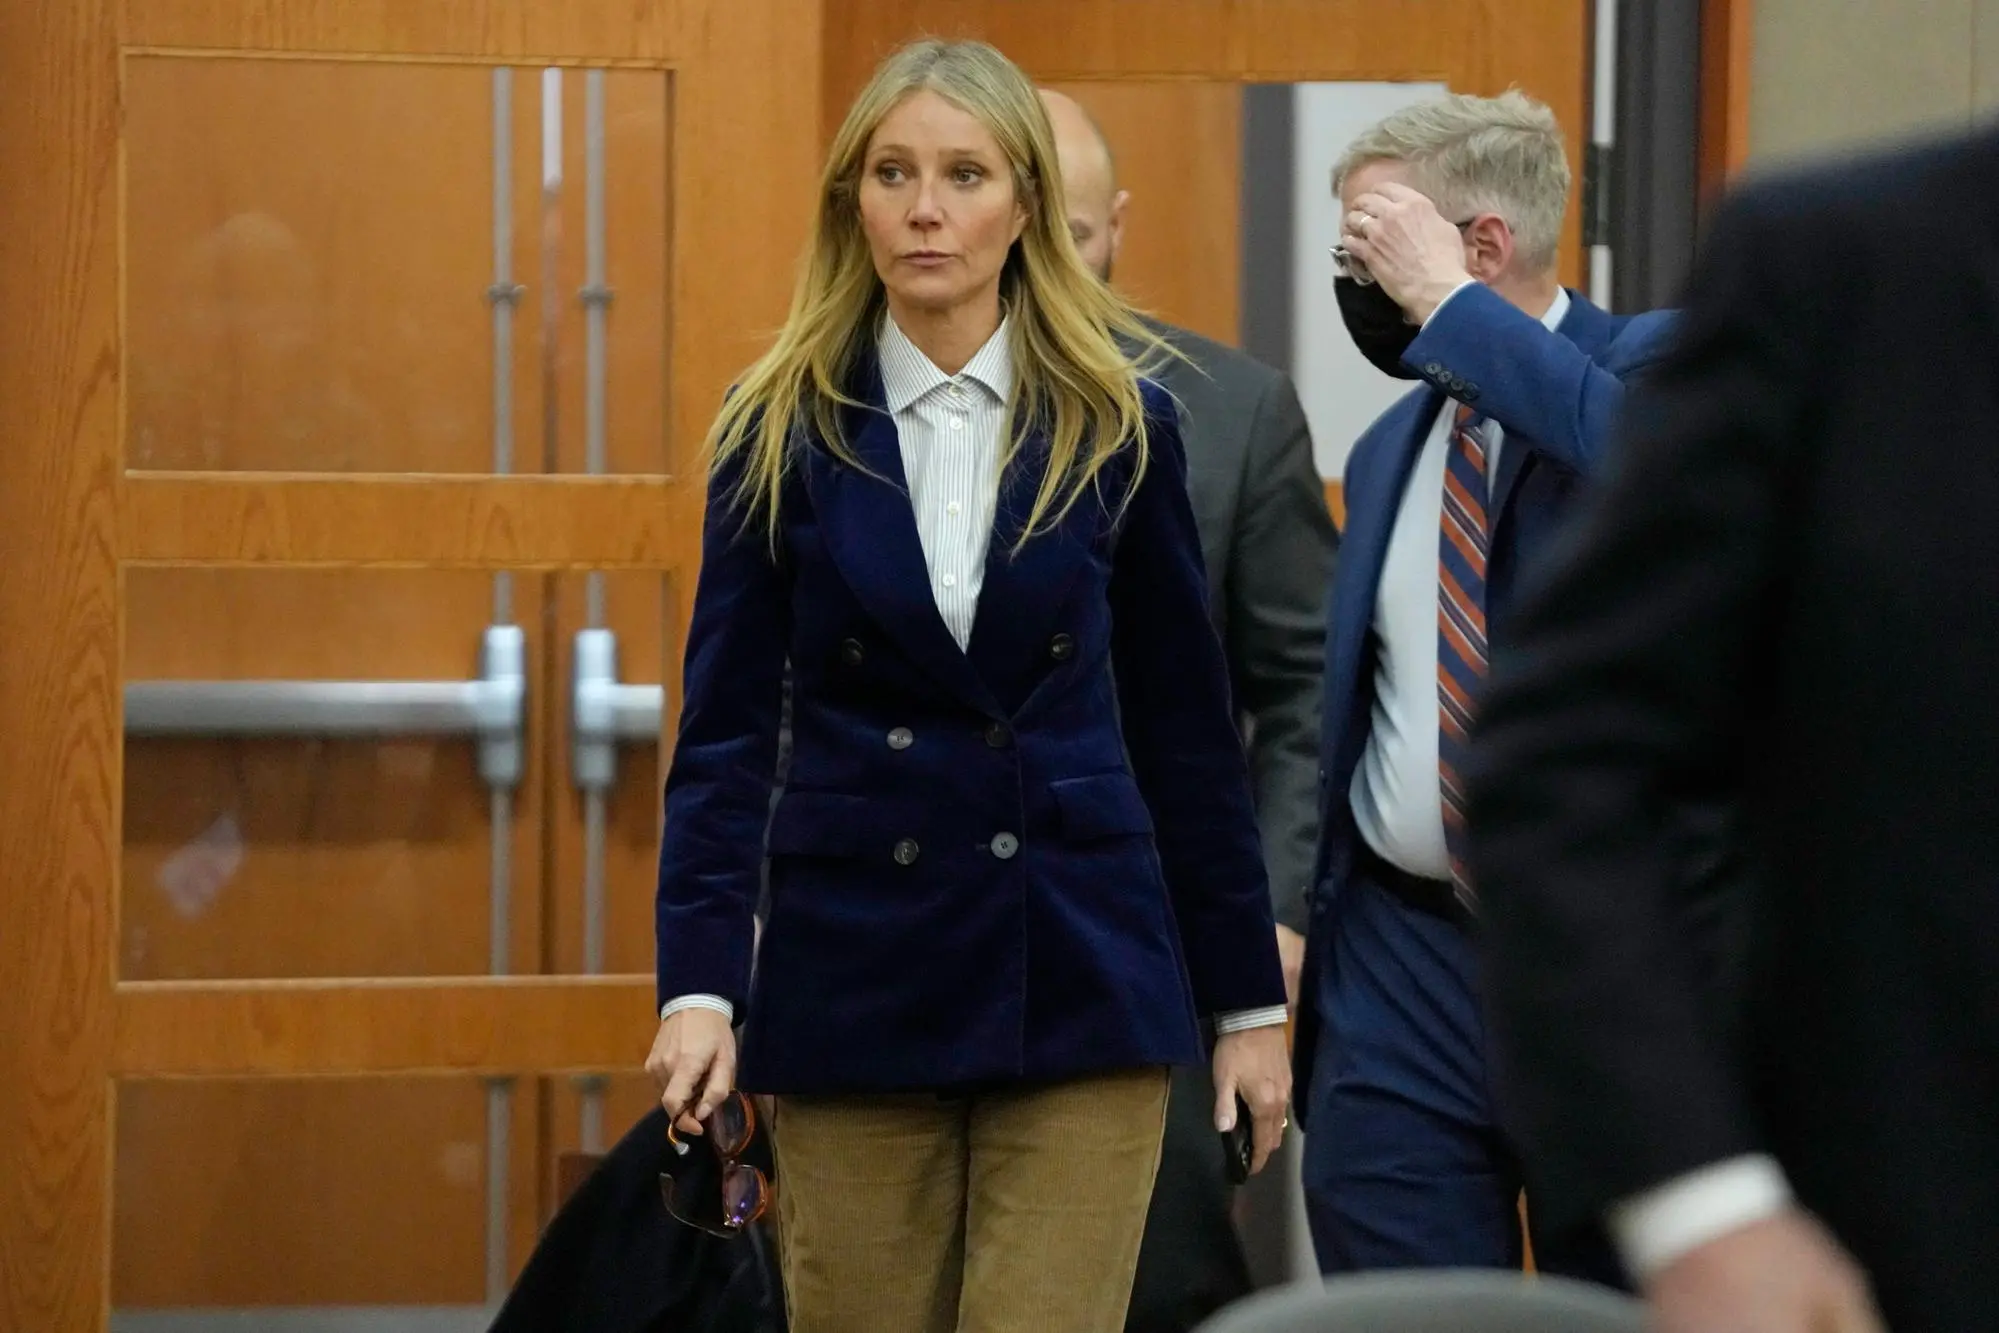 epa10551495 Gwyneth Paltrow walks in to the courtroom before the reading of the verdict in the trial over her 2016 ski collision with 76-year-old Terry Sandersonon the final day of her eight-day trial in Park City, Utah, USA, 30 March 2023. Terry Sanderson was suing Gwyneth Paltrow for 300,000 USD, claiming she recklessly crashed into him while the two were skiing on a beginner run at Deer Valley Resort in Park City, Utah in 2016. The jury found Paltrow not liable. EPA/Rick Bowmer / POOL